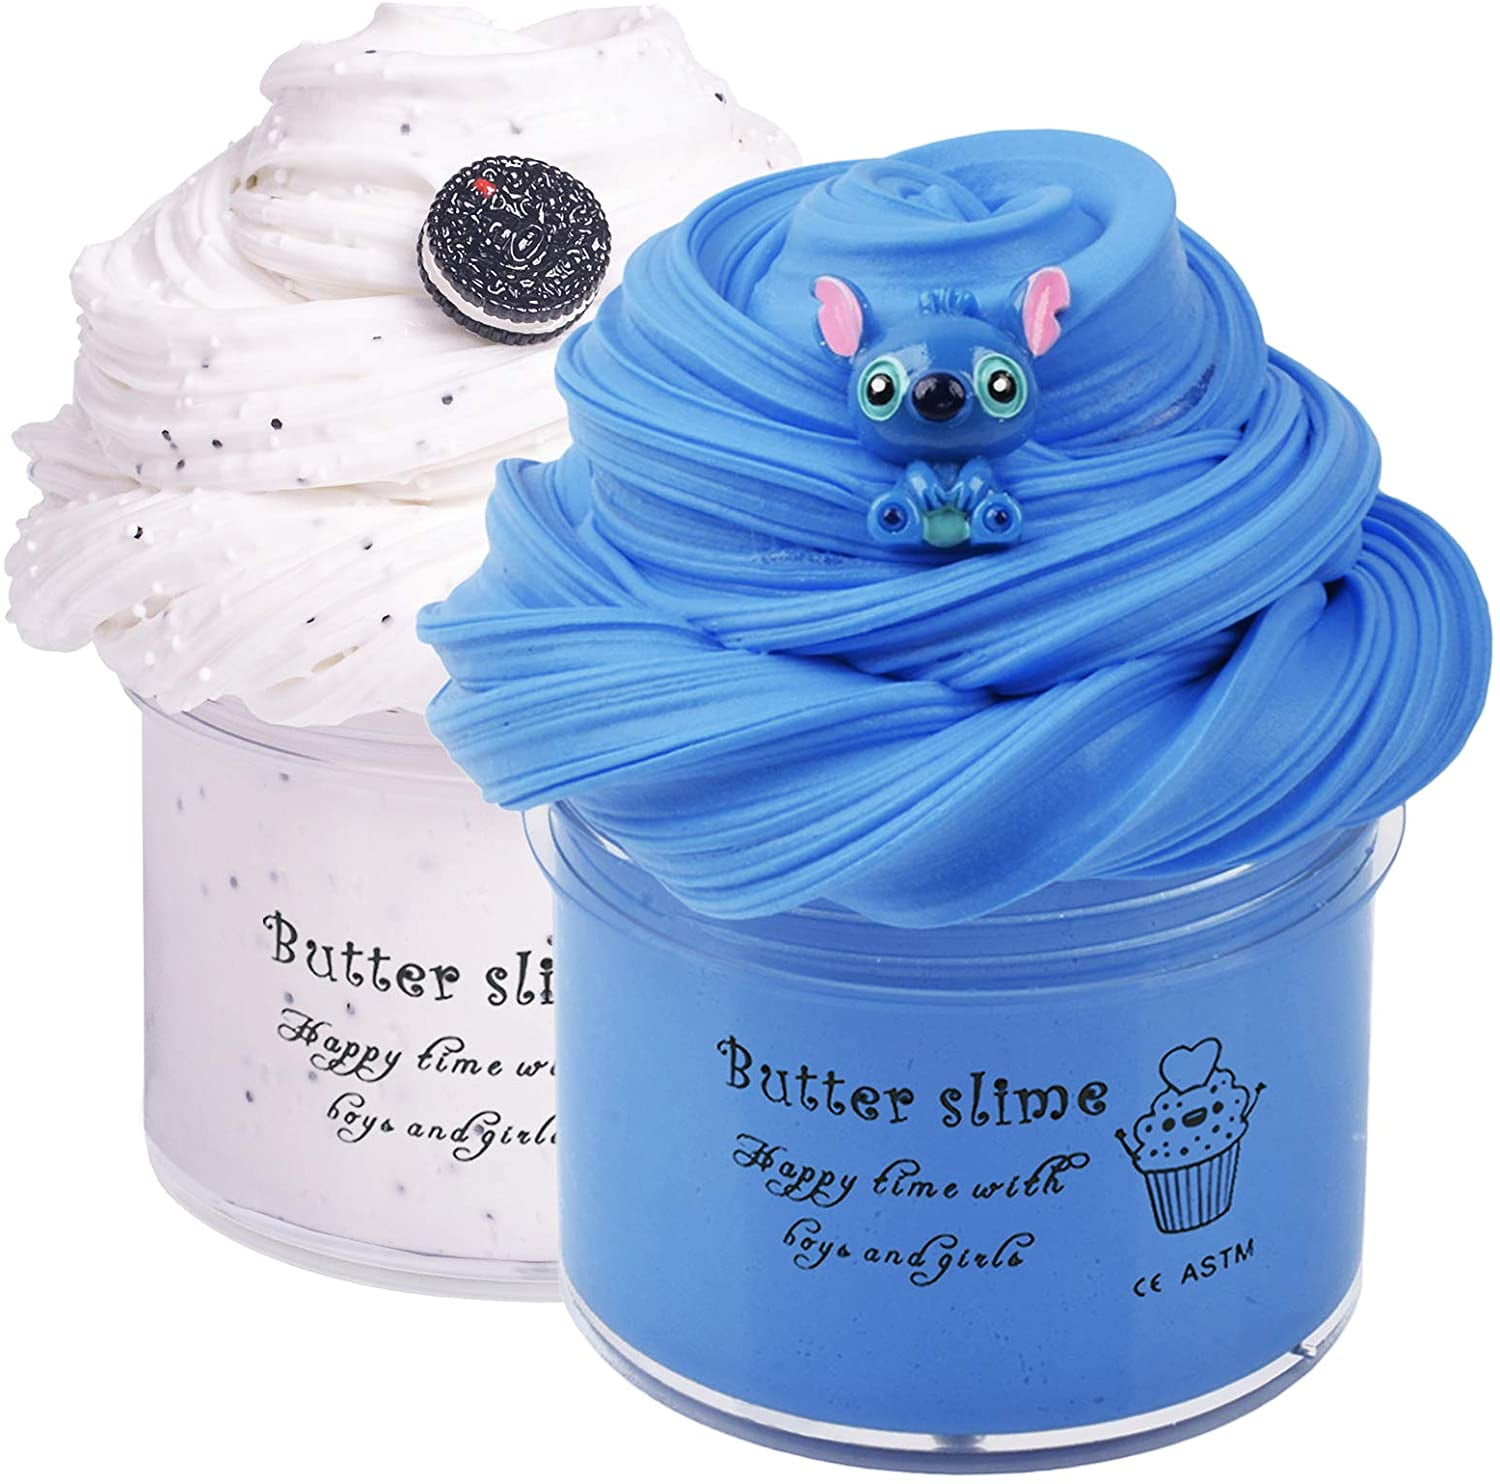 2 Pack Butter Slime Kit Blue Stitch White Oreo Charm With Glitters And